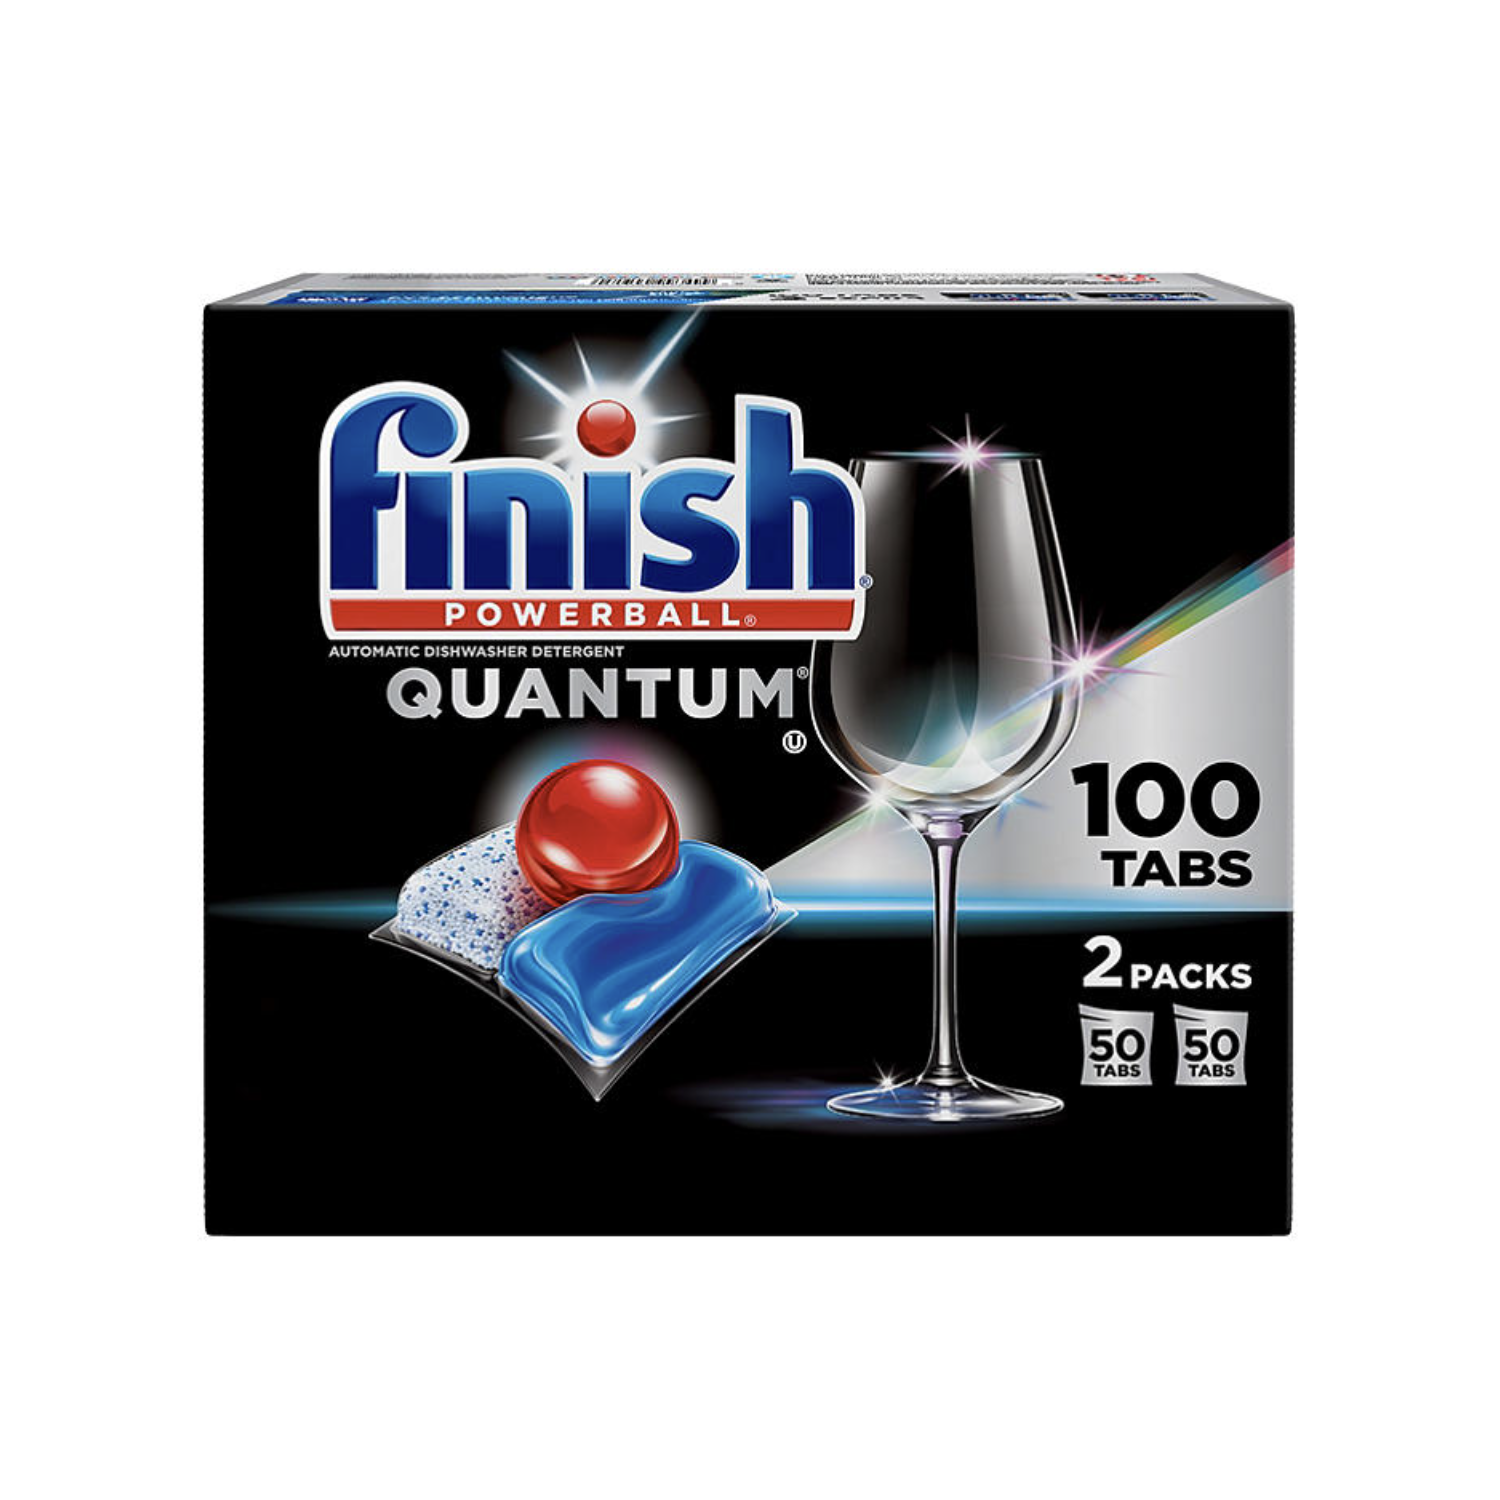 Finish Quantum Automatic Shine - 100 Count - Dishwasher Detergent - Powerball - Our Best Ever Clean and Shine - Dishwashing Tablets - Dish Tabs (Packaging May Vary)